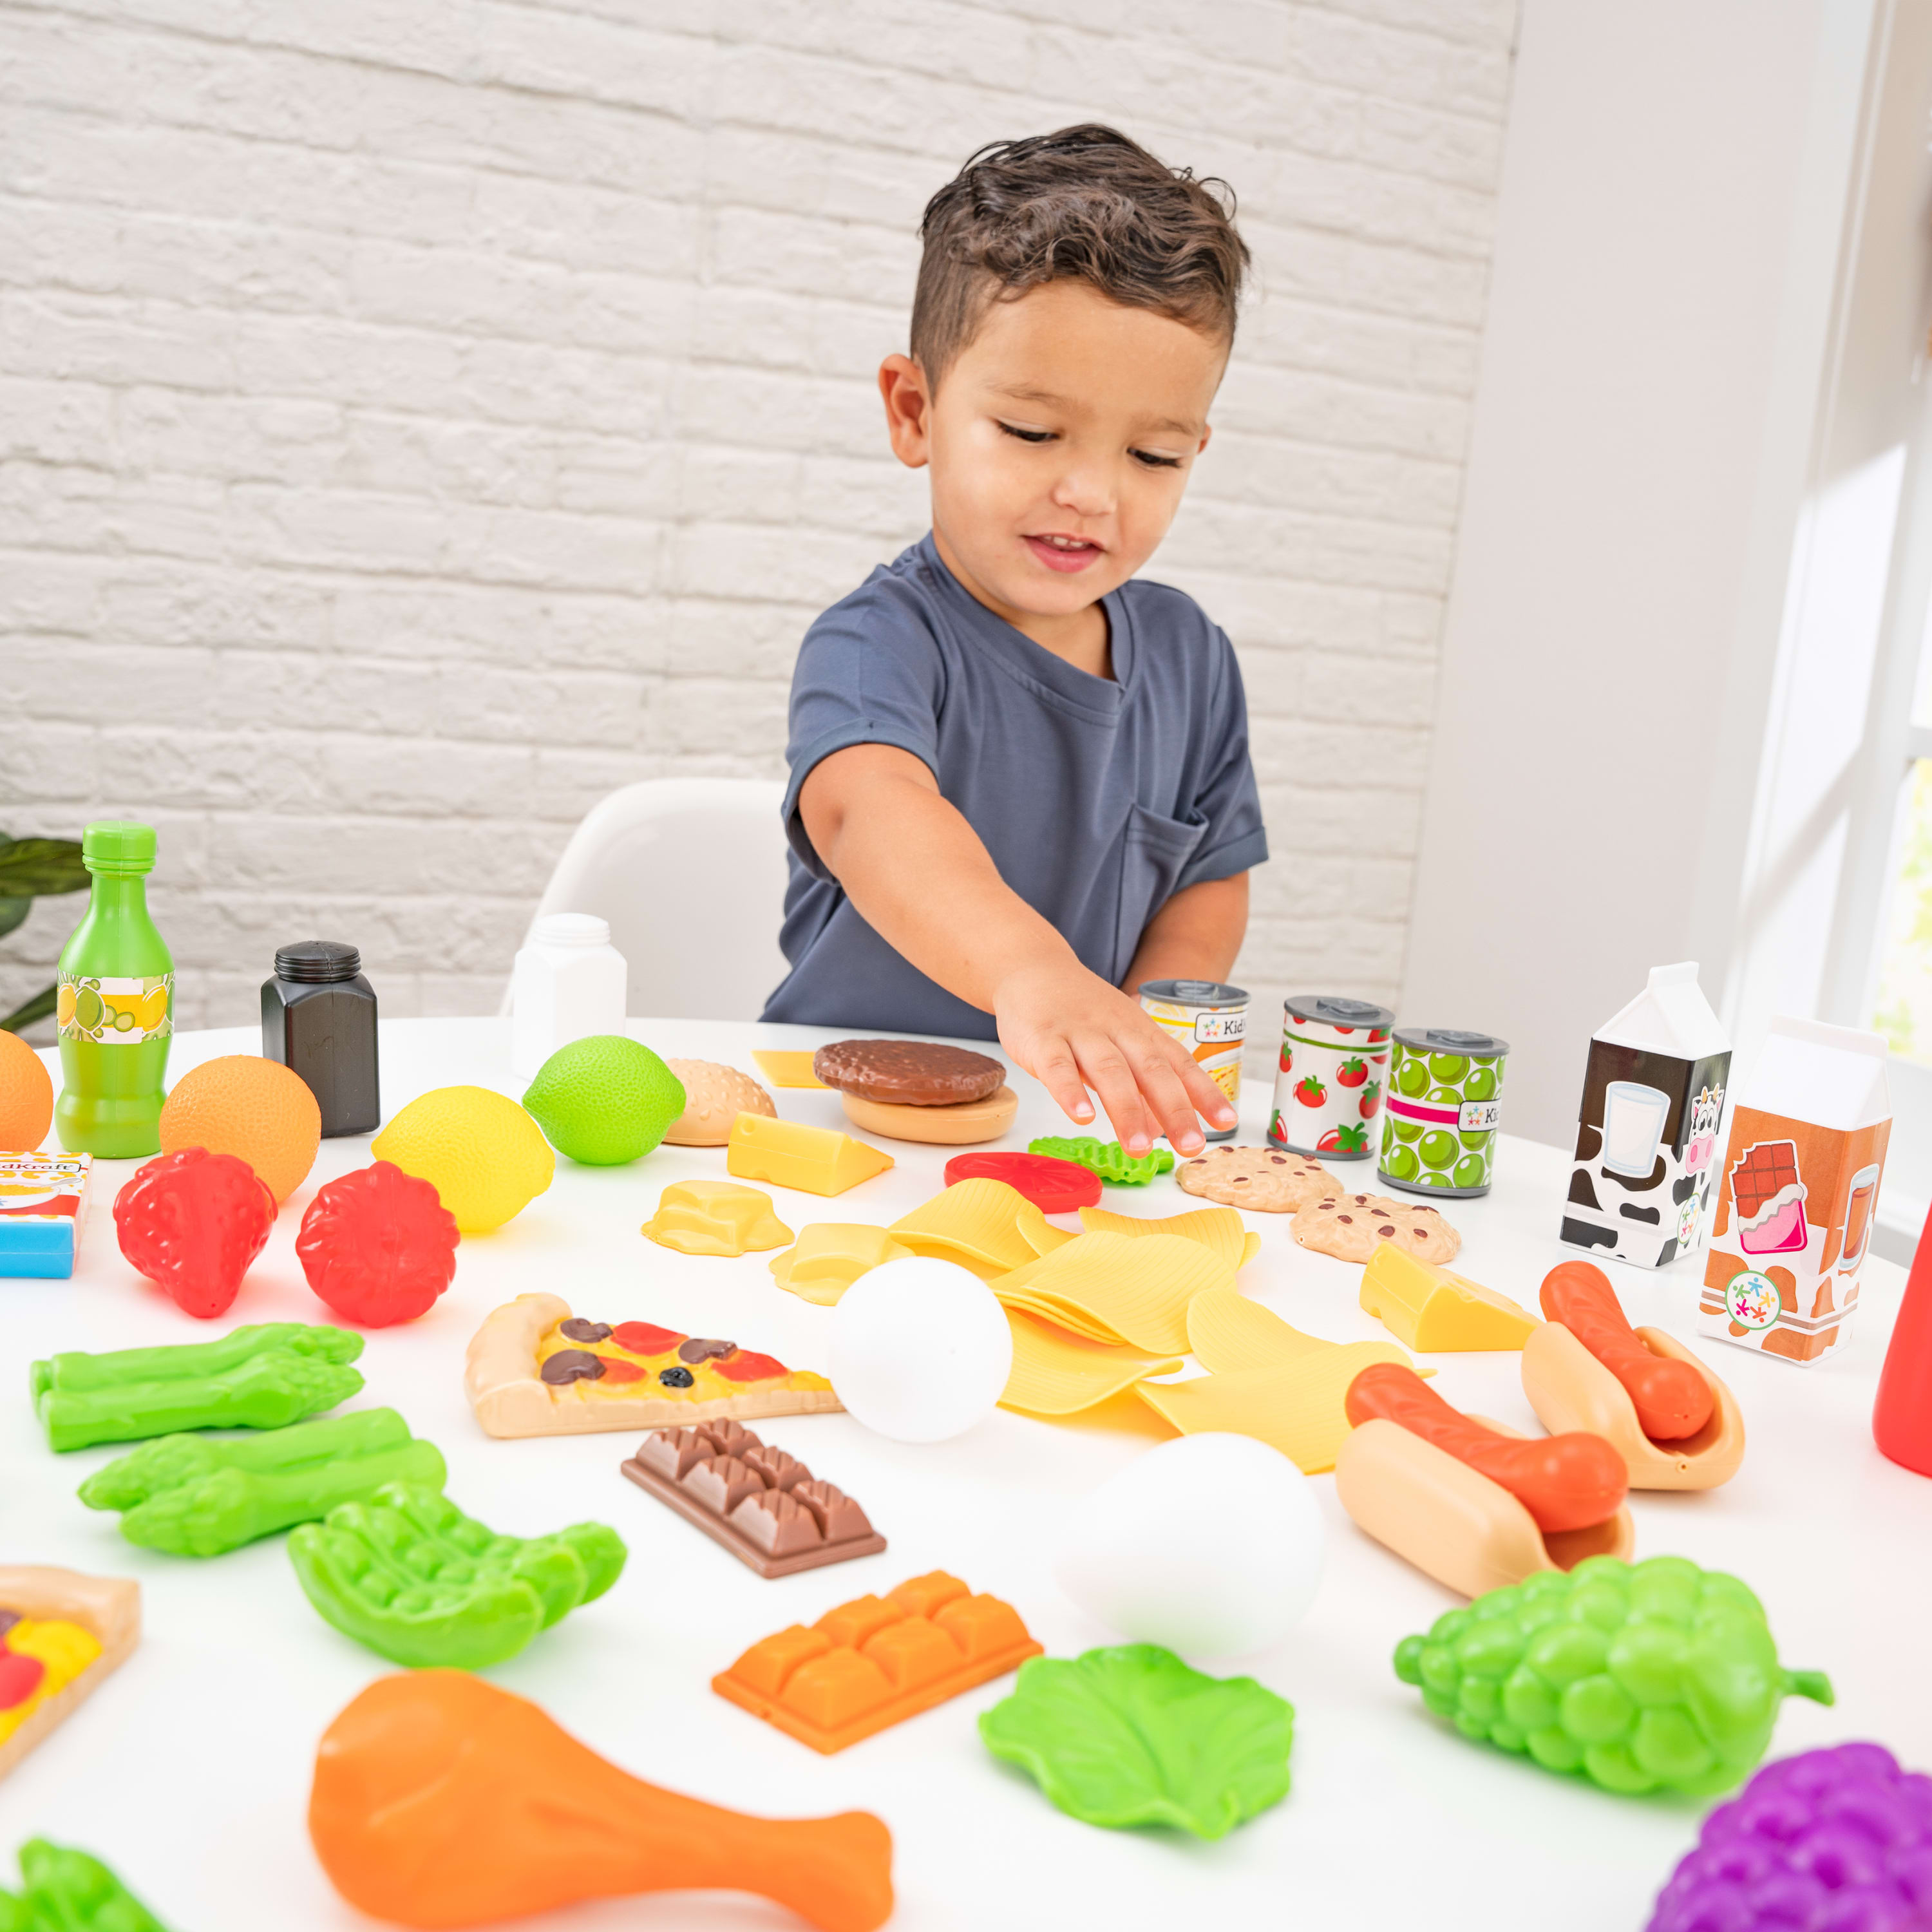 KidKraft 115-Piece Deluxe Tasty Treats Play Food Set, Plastic Grocery and Pantry Items - image 3 of 6